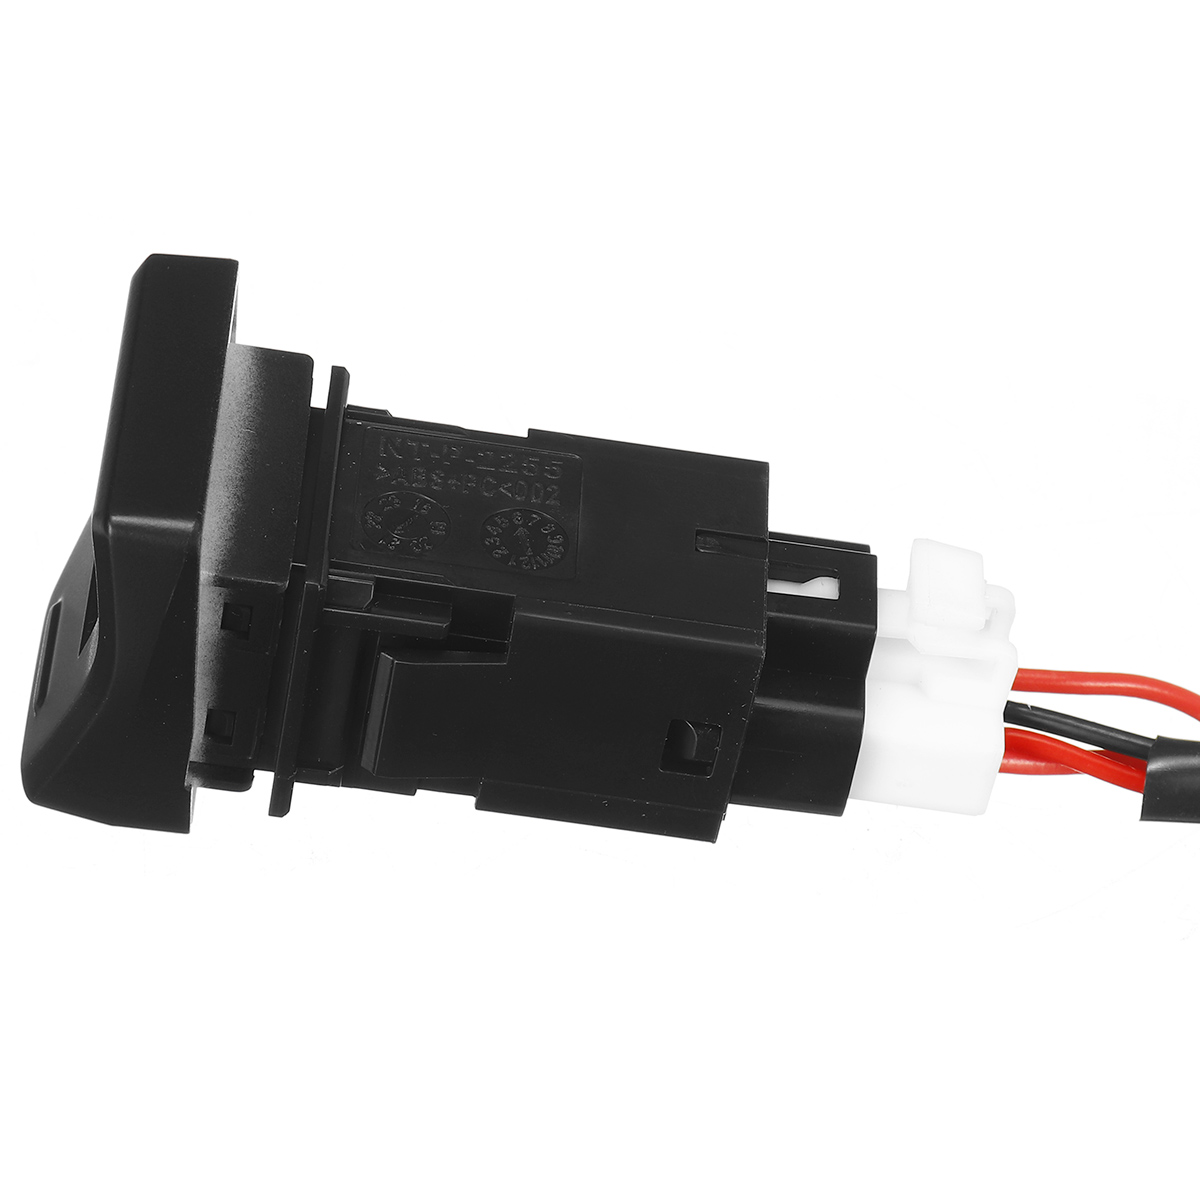 Bakeey-Central-Control-Position-QC30-Car-Charger-For-Toyota-RAV4-2019-2020-2021-Bouton-Backlight-5th-1885890-10